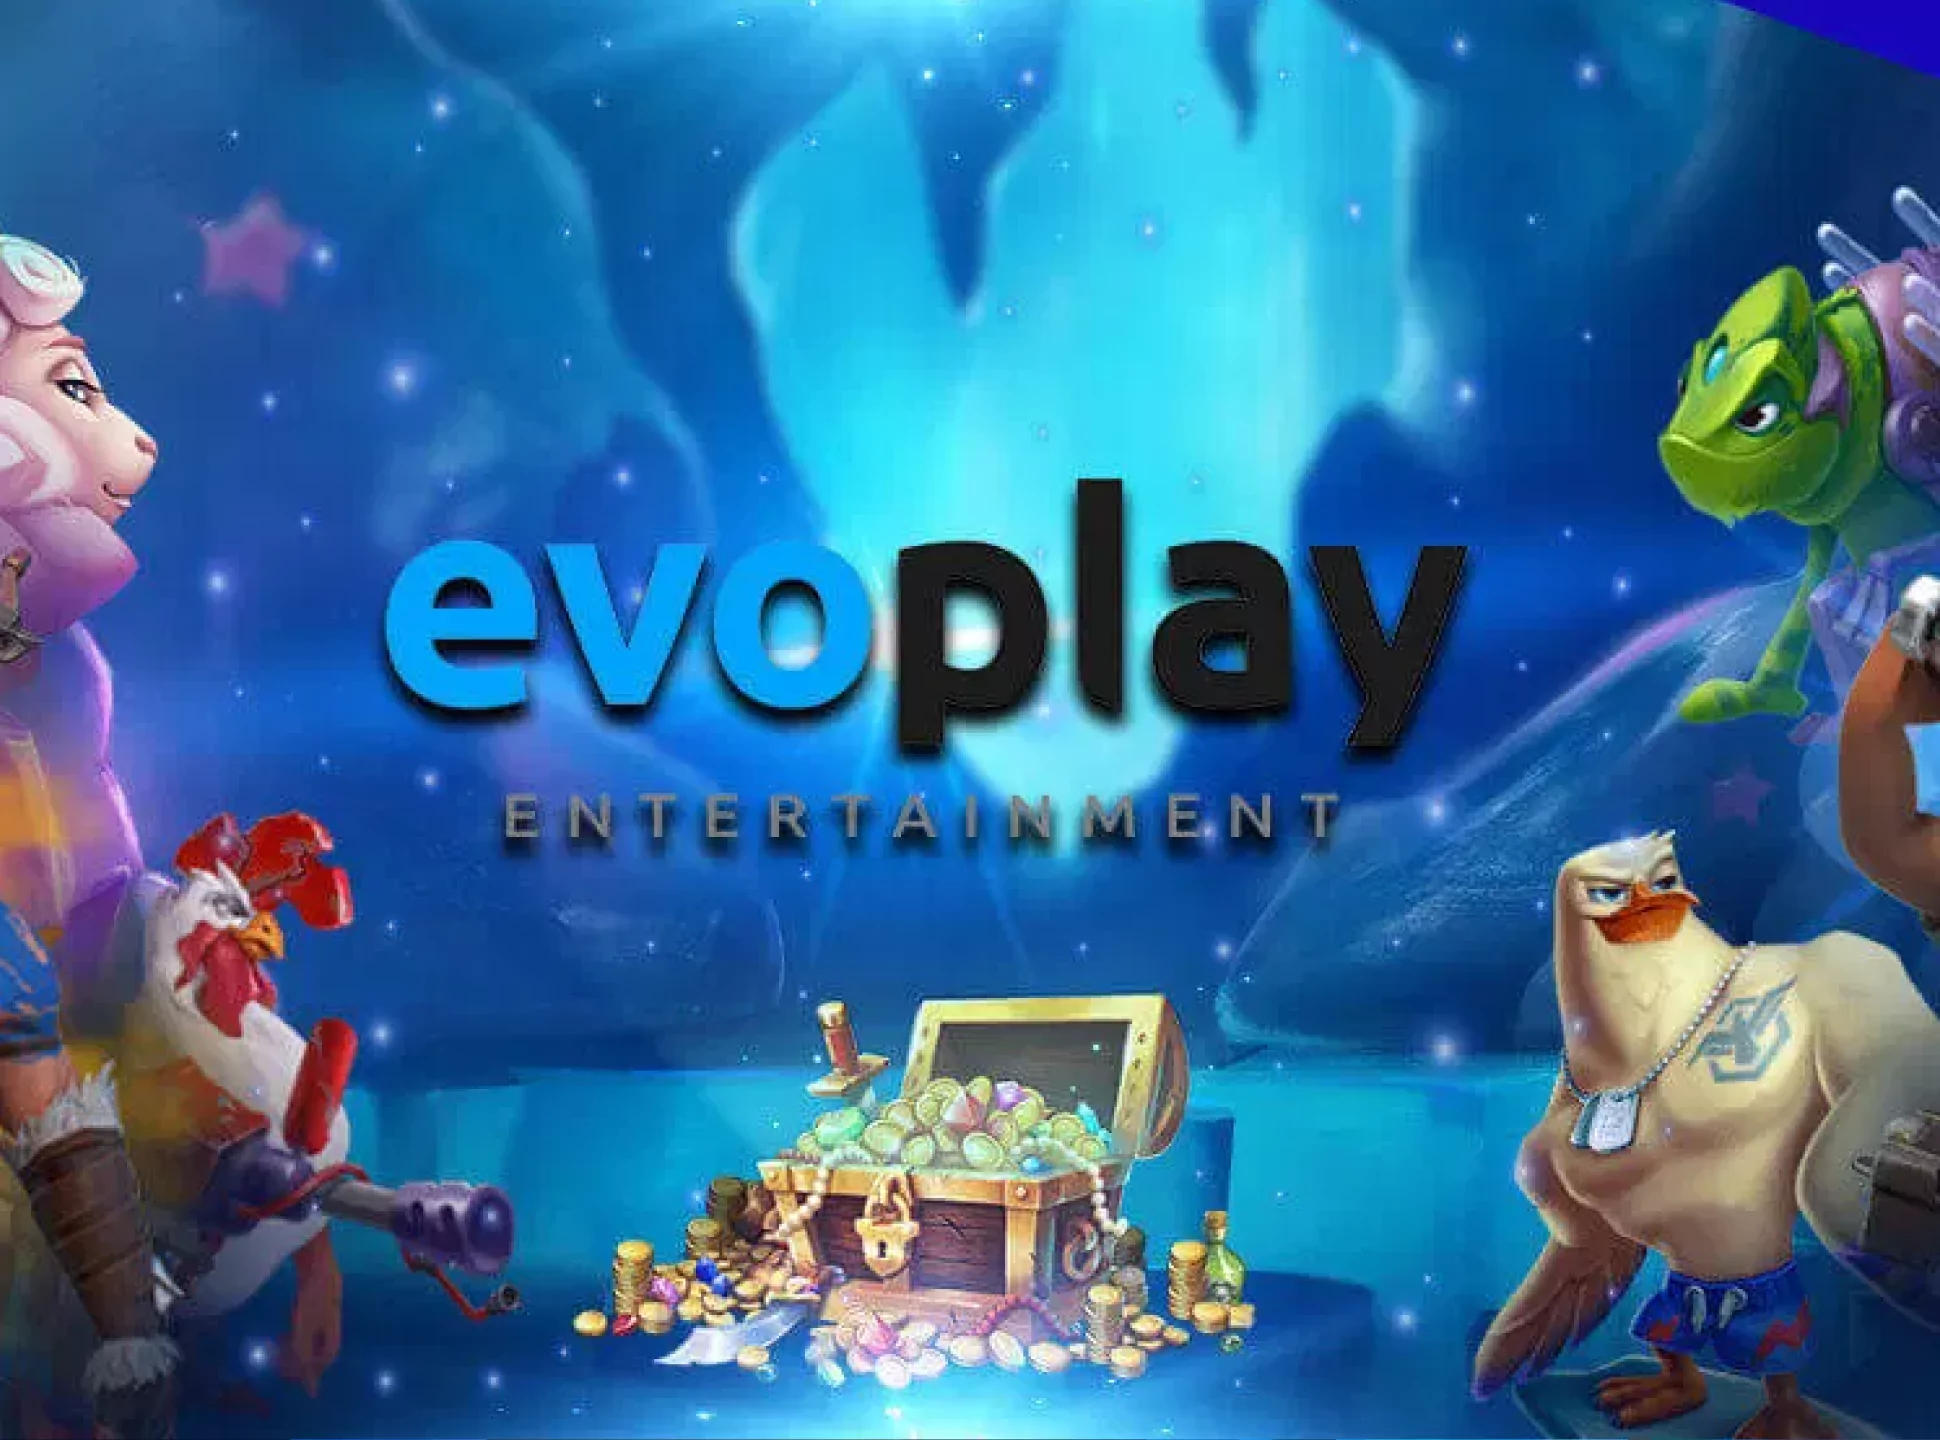 Evoplay has offices around the world and releases verious slot games.